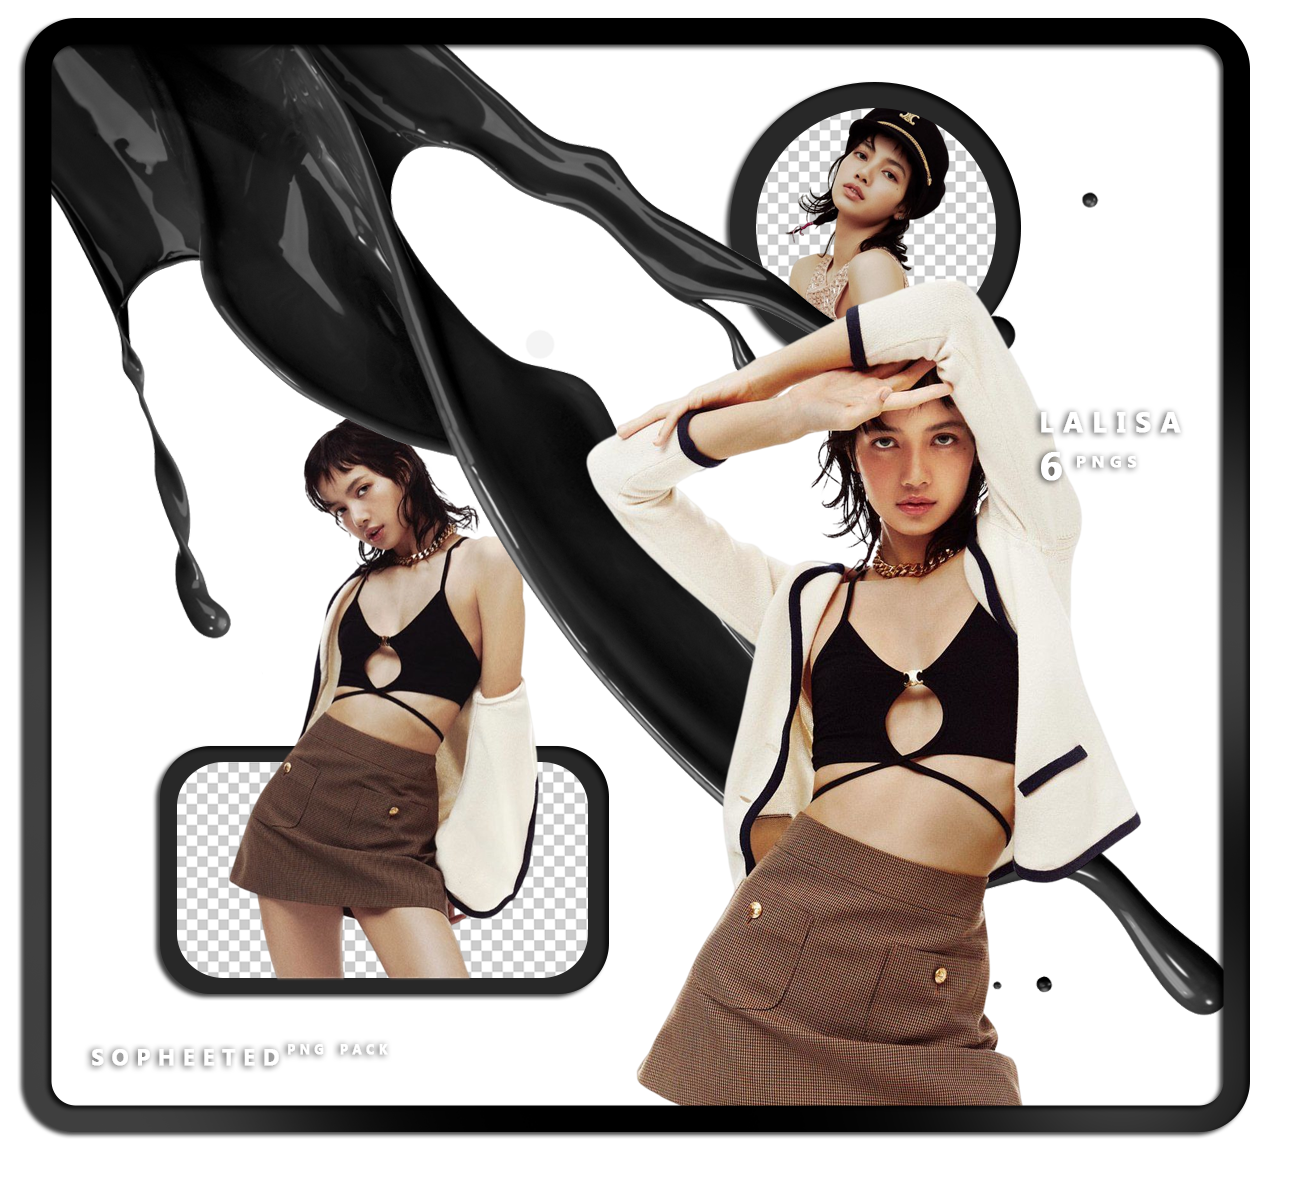 BLACKPINK JENNIE png pack by sopheeted by sopheeTed on DeviantArt